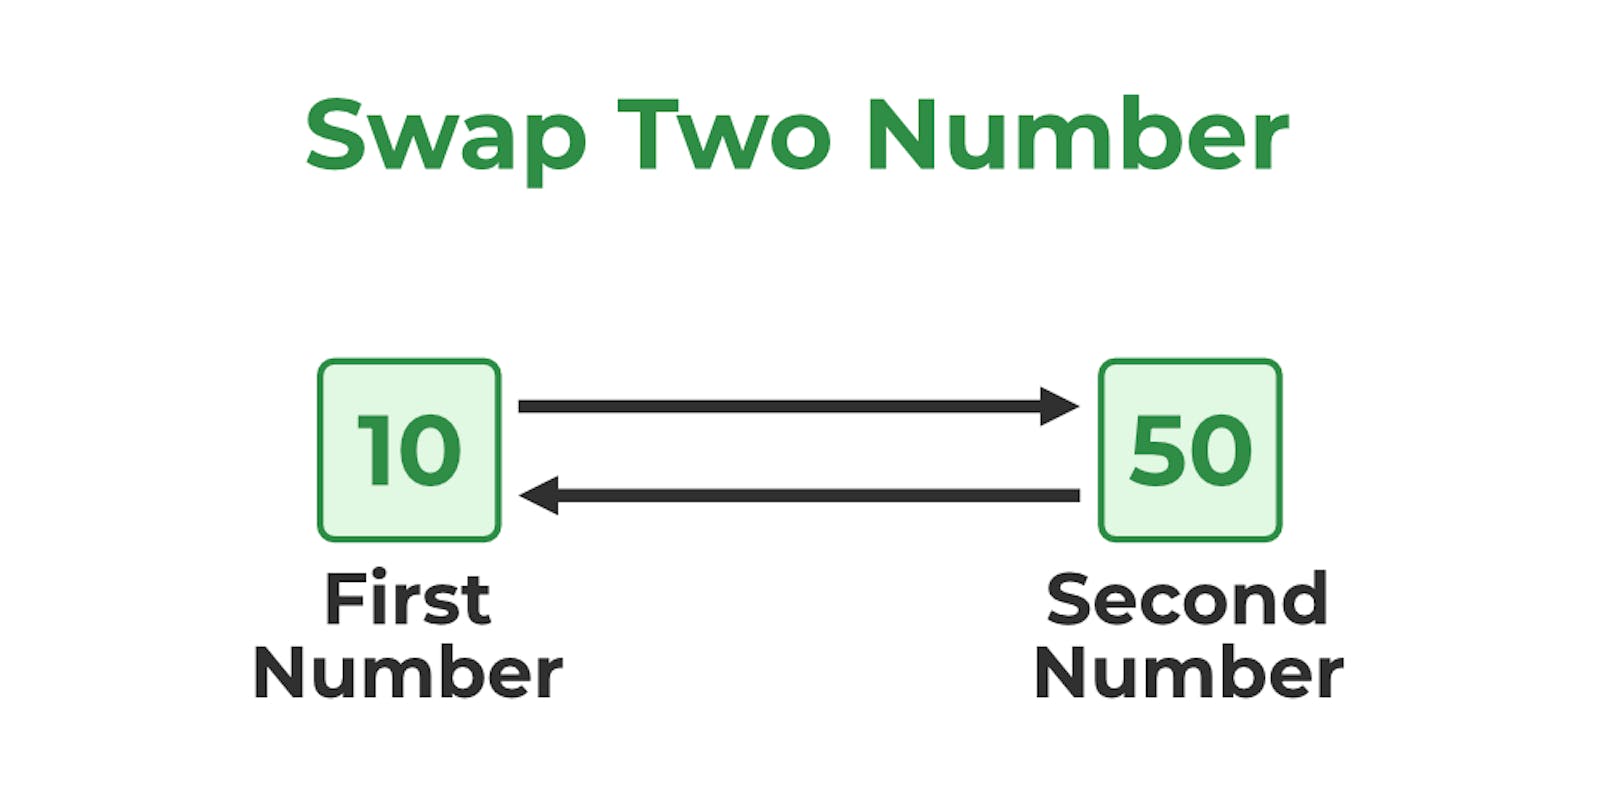 Swapping of two numbers